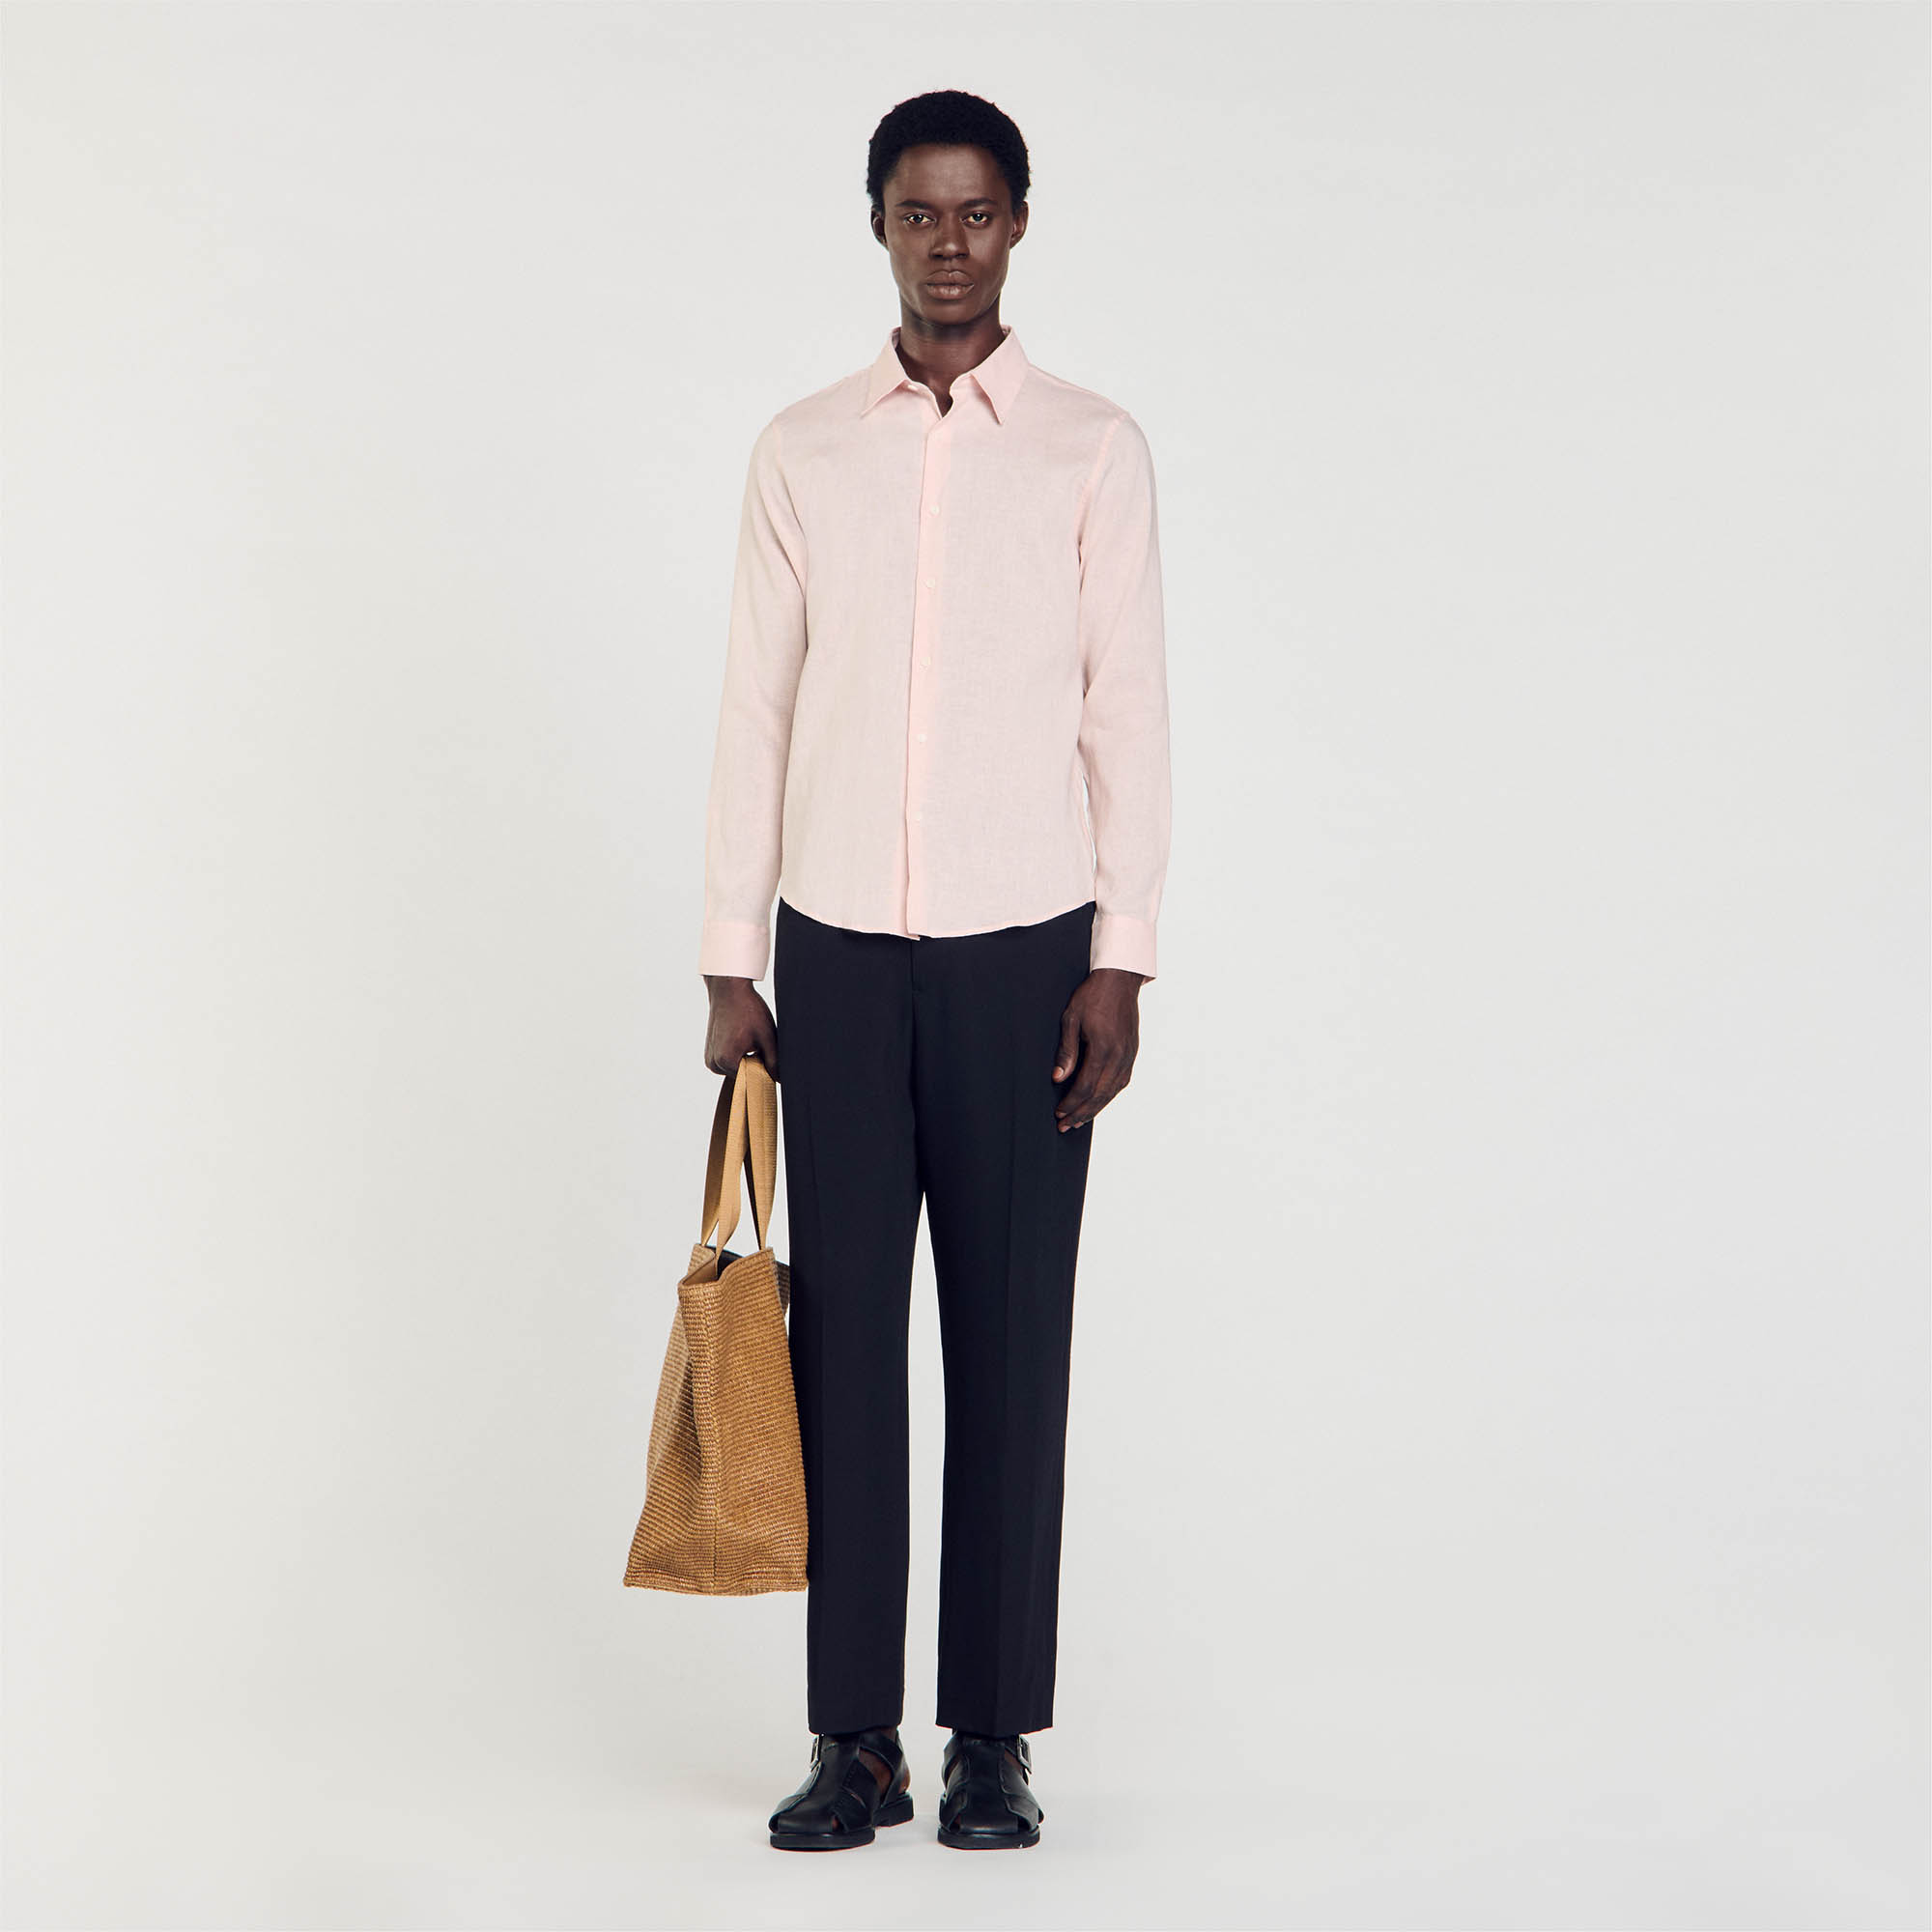 Sandro cotton Classic buttoned shirt with a stand collar and long sleeves with buttoned cuffs